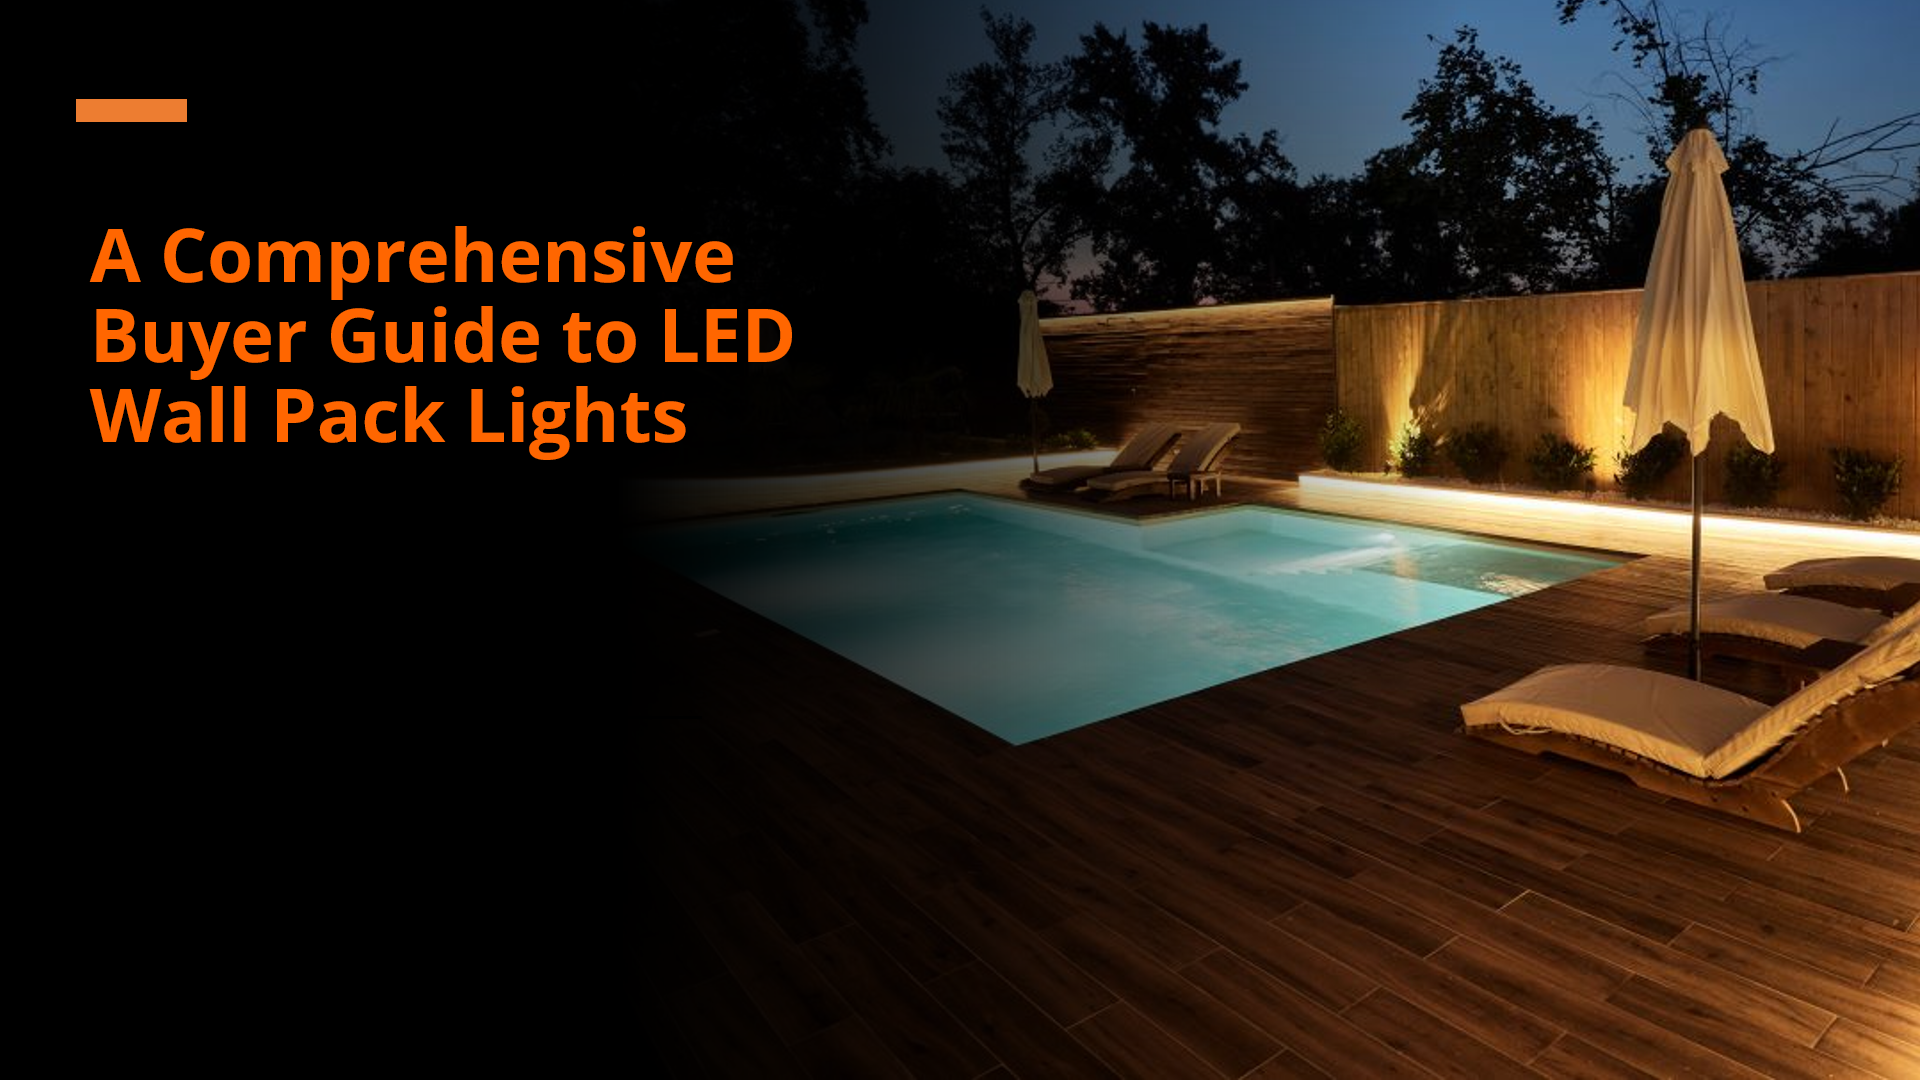 A Comprehensive Buyer Guide to LED Wall Pack Lights